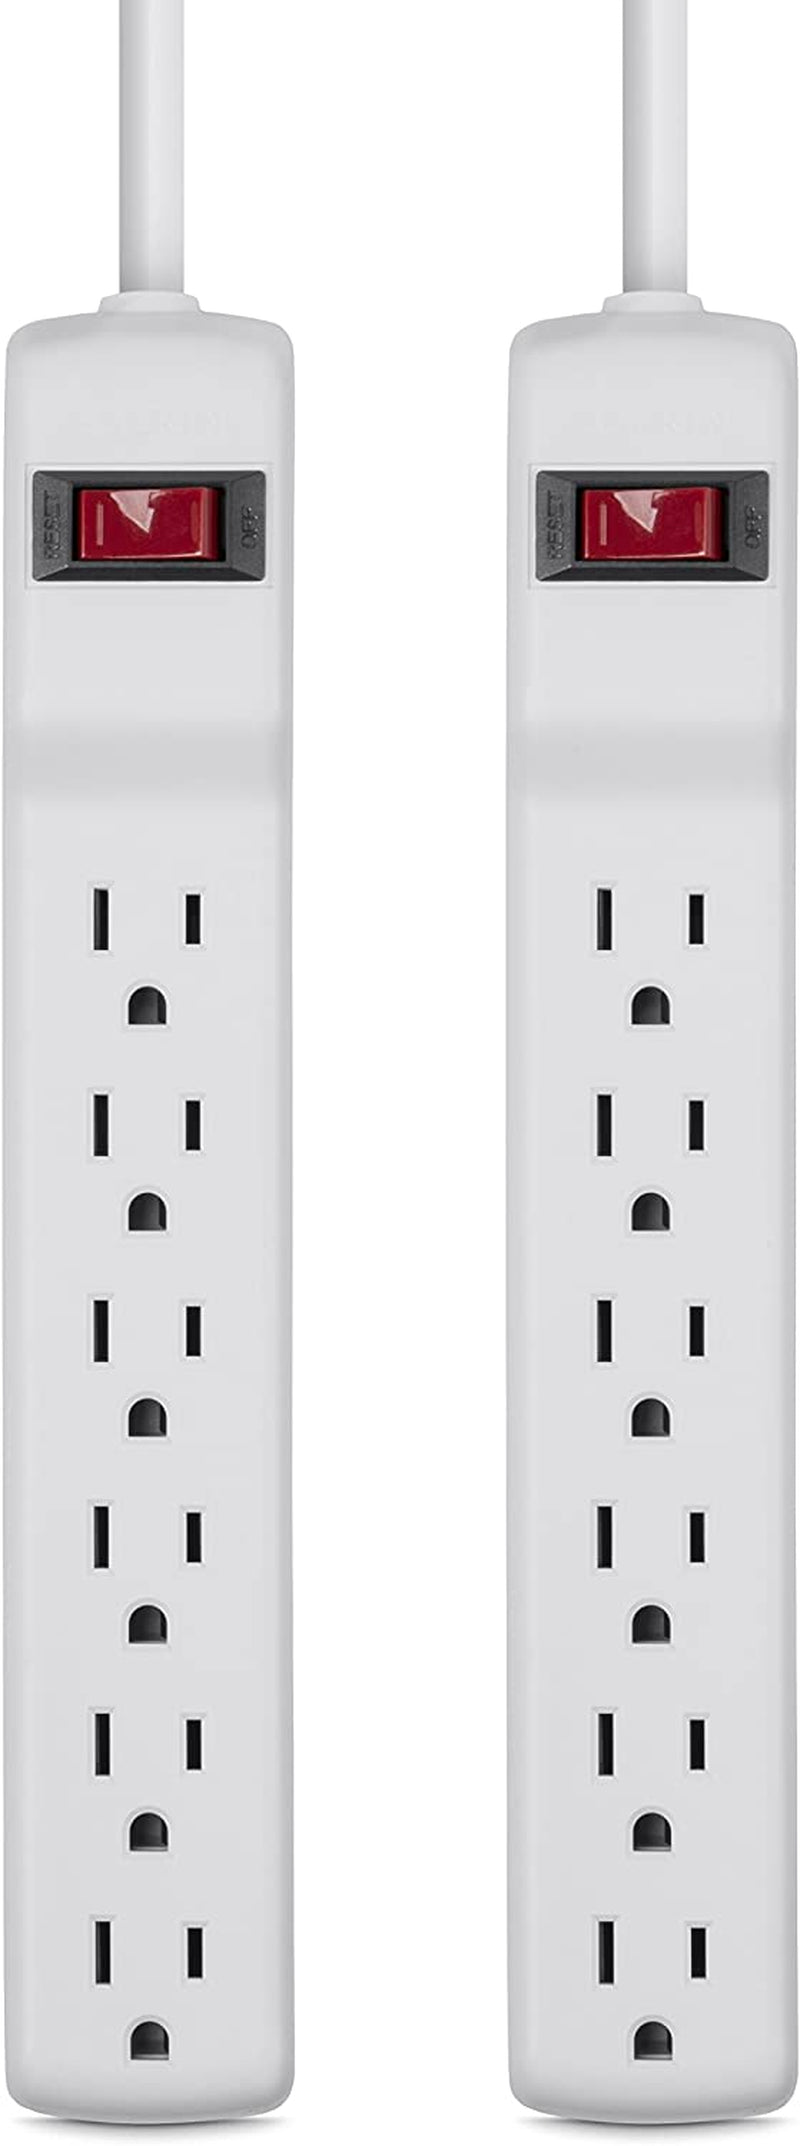 Belkin Power Strip Surge Protector - 6 AC Multiple Outlets, 2 Ft Long Heavy Duty Metal Extension Cord for Home, Office, Travel, Computer Desktop & Phone Charging Brick - 200 Joules, White (2 Pack)